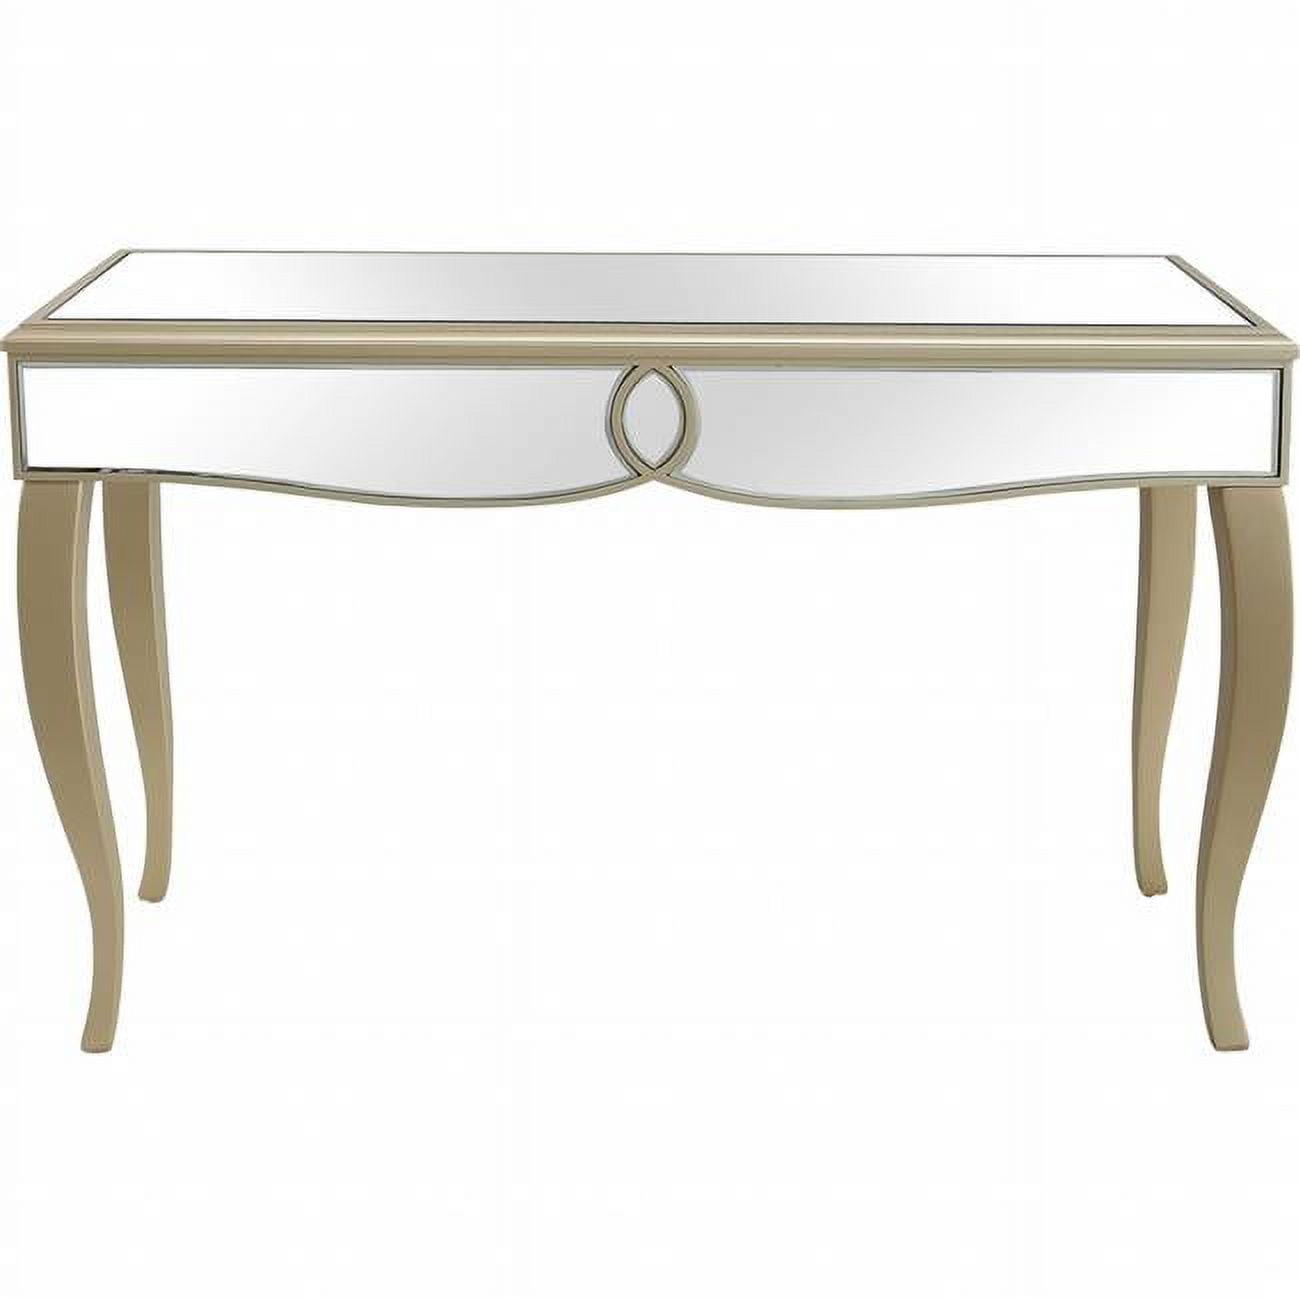 Elegance Unleashed Mirrored Wood Console Table with Curved Legs